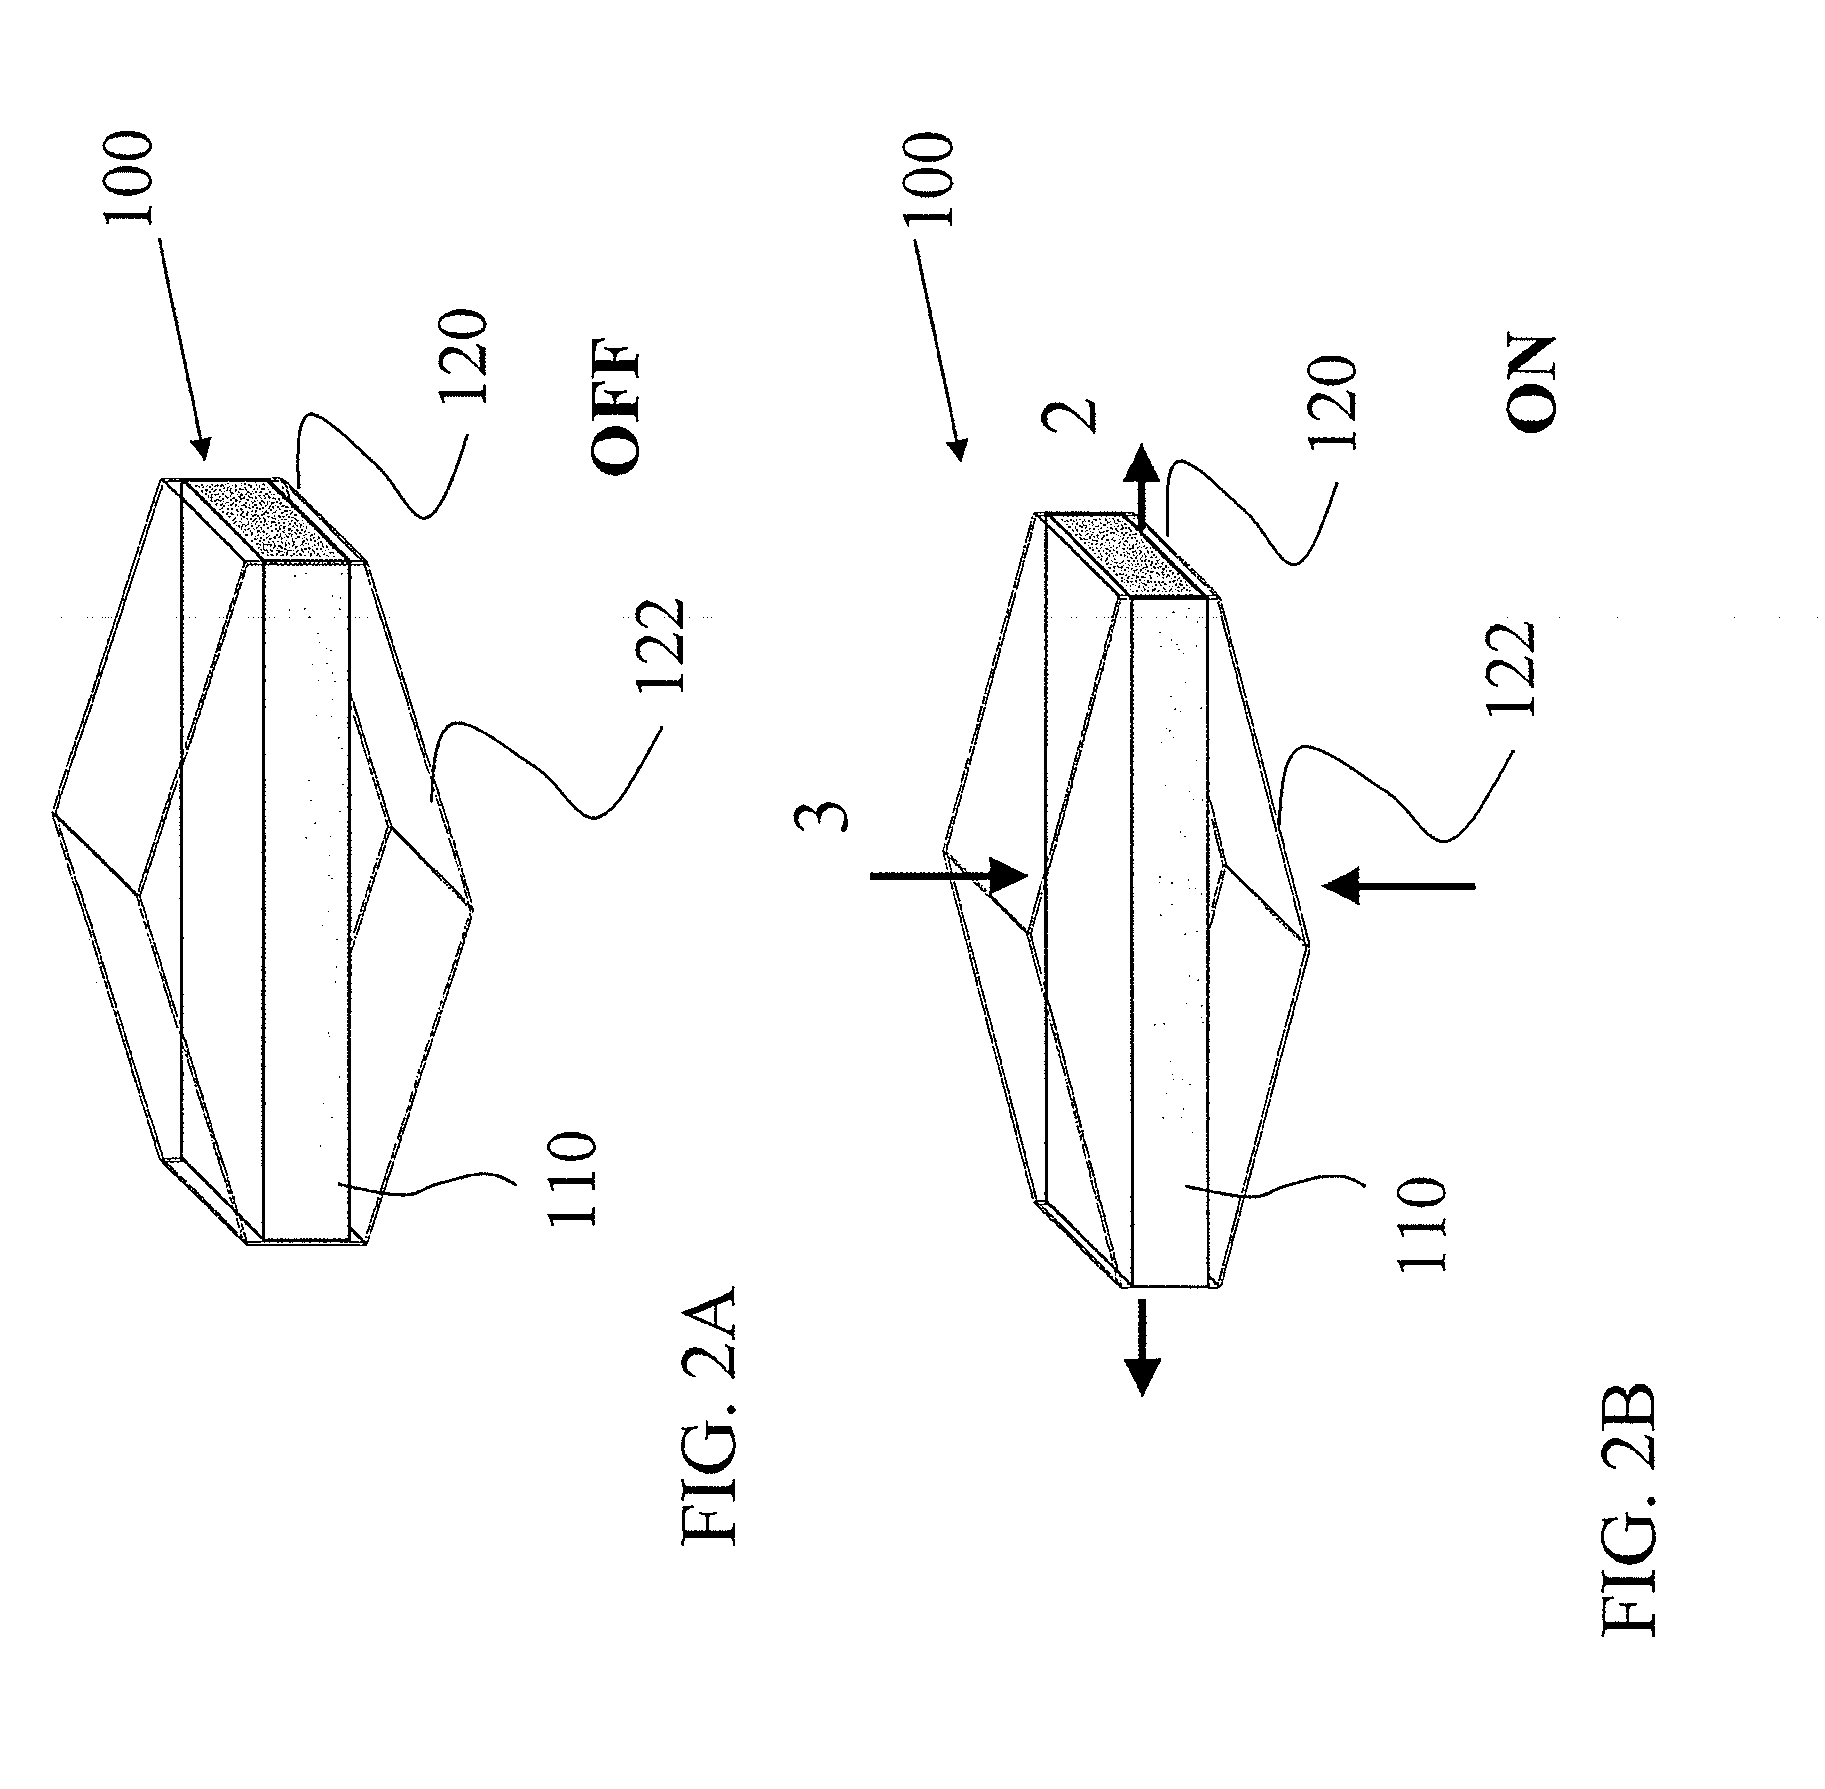 Strain amplification devices and methods